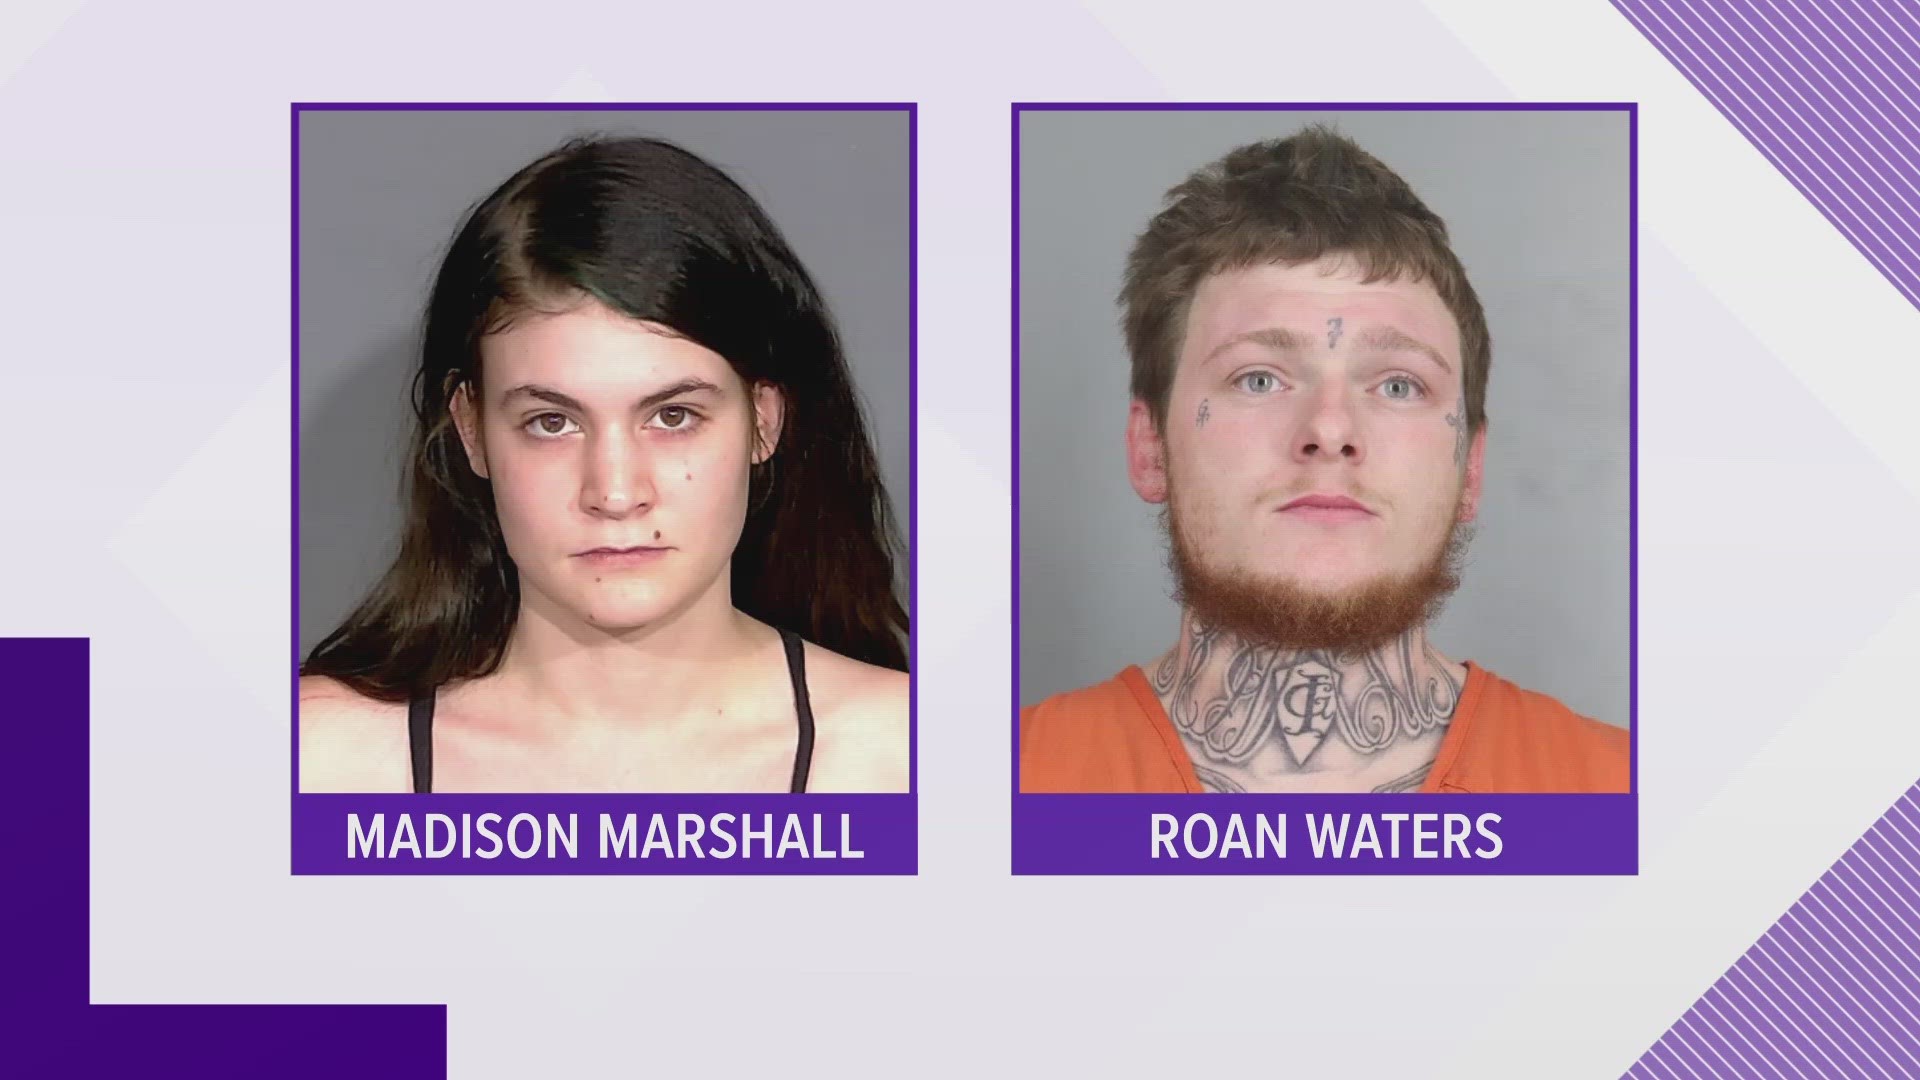 Madison Marshall, Oaklee's mother, faces charges of neglect. Roan Waters, her boyfriend, faces murder charges.